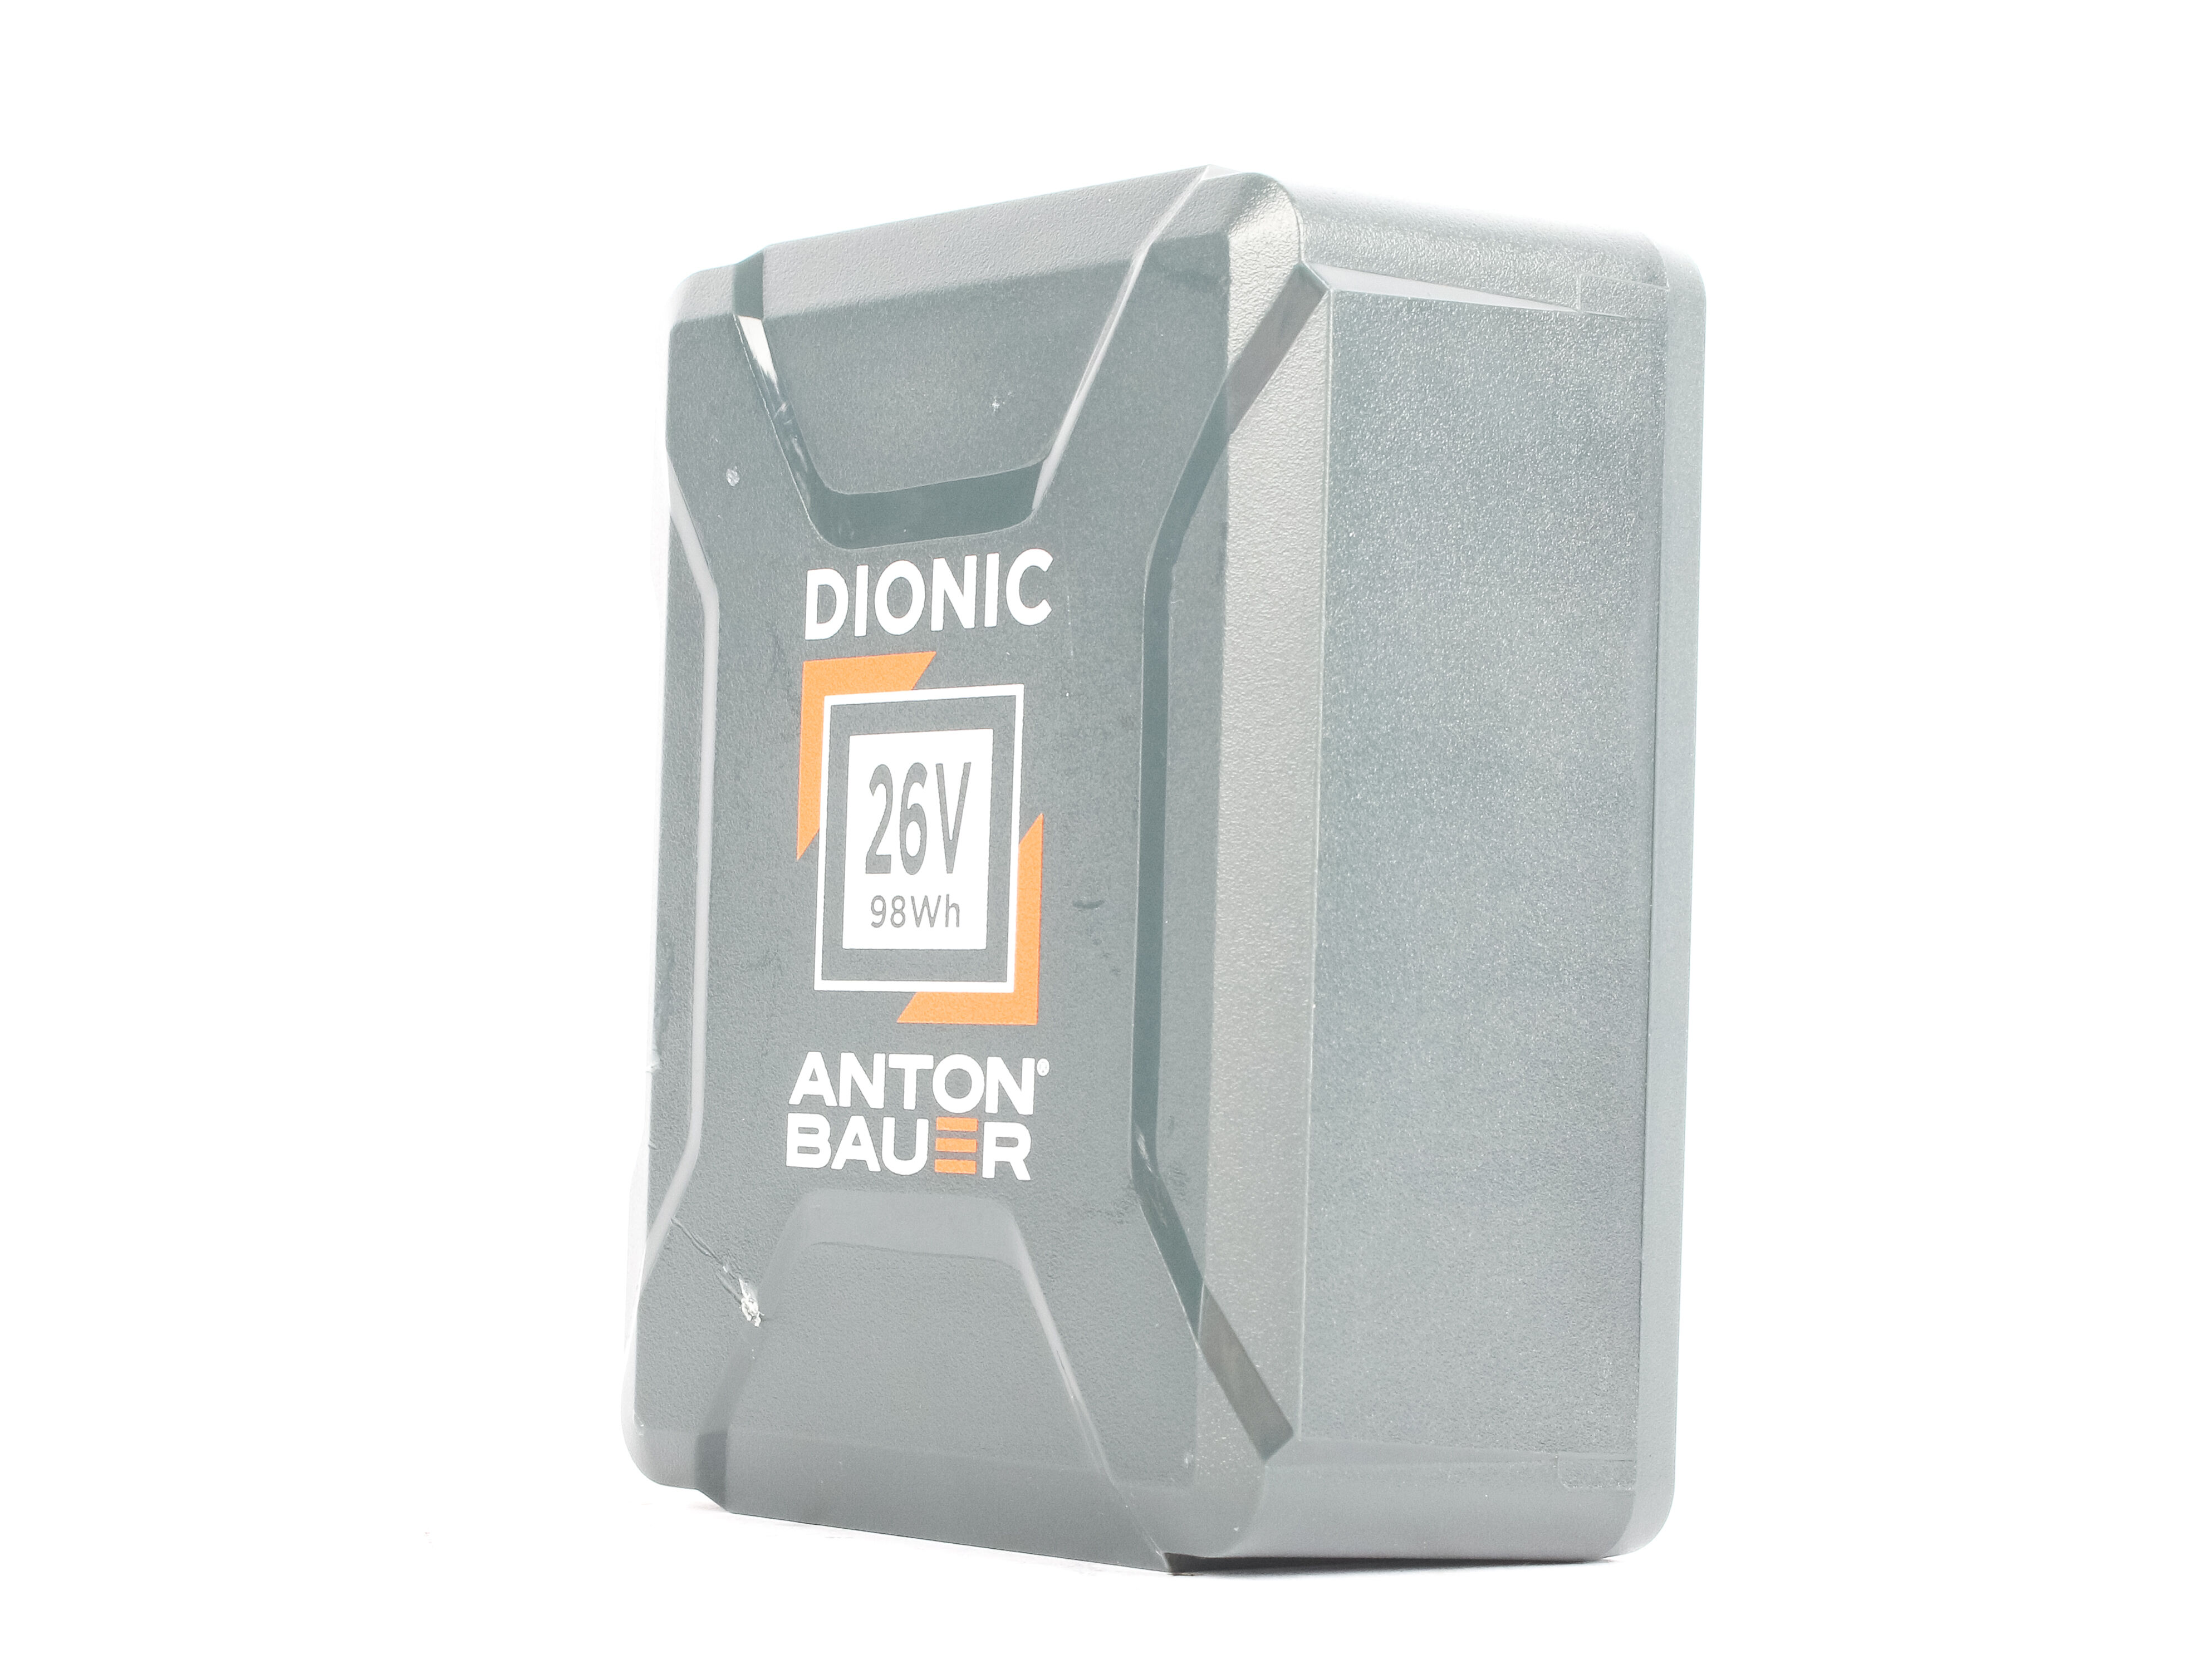 Used Anton Bauer Dionic 98Wh 26V Gold Mount Plus Battery